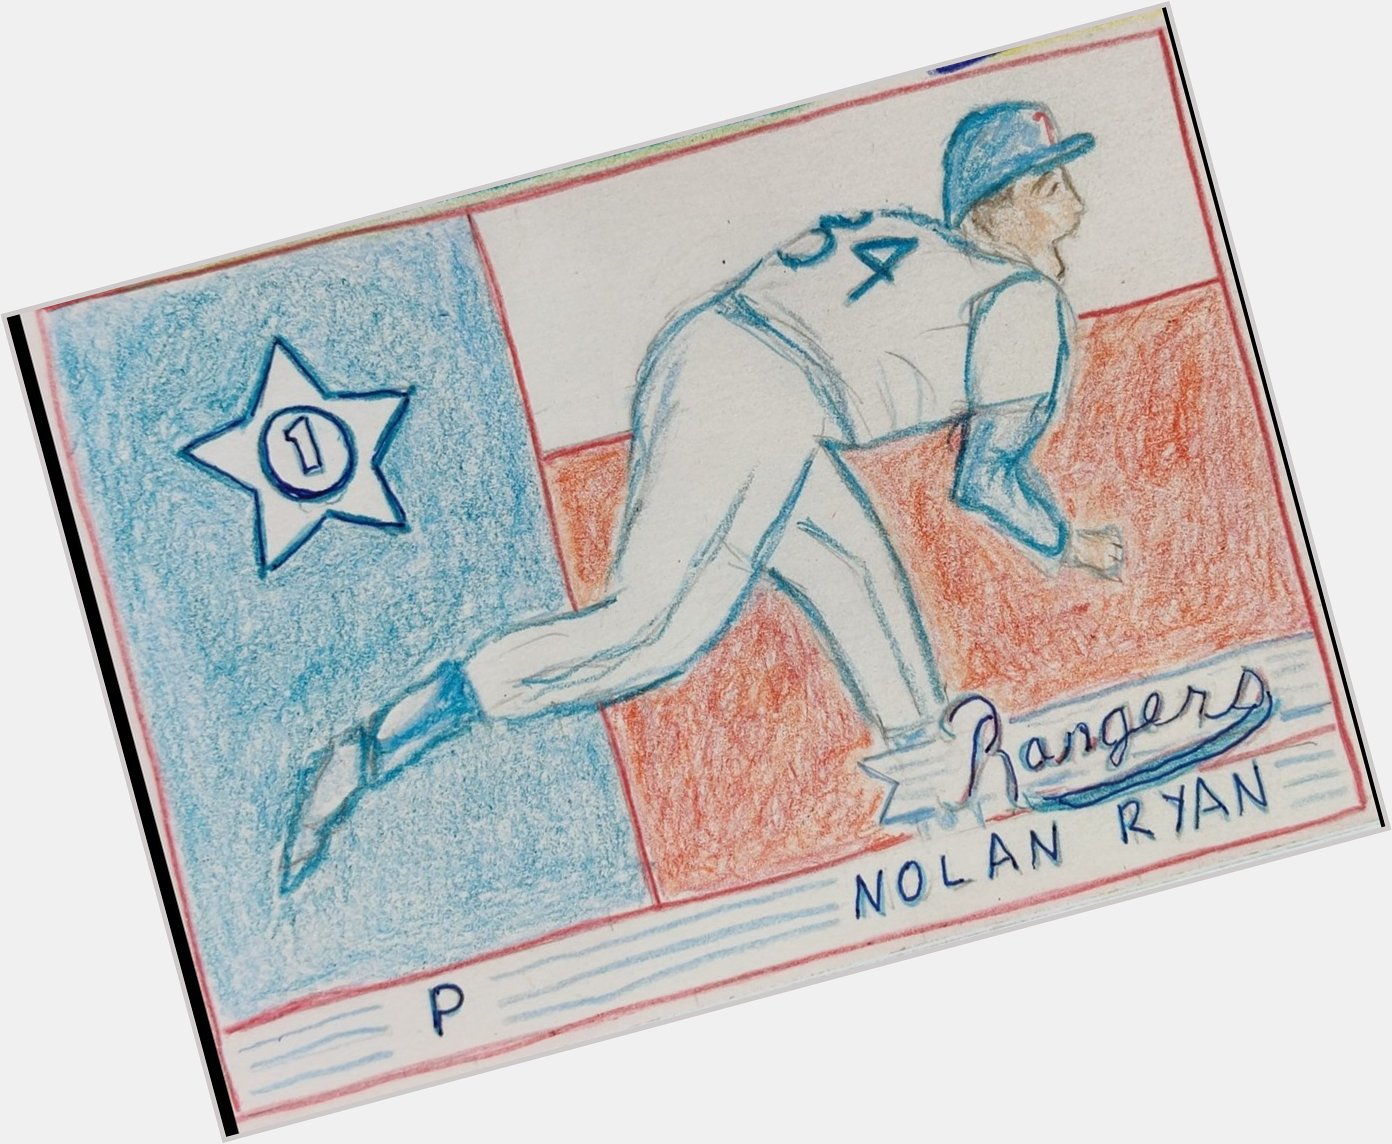 Happy 75th Birthday Nolan Ryan.

From our card series we have our 1991 Topps offering. 